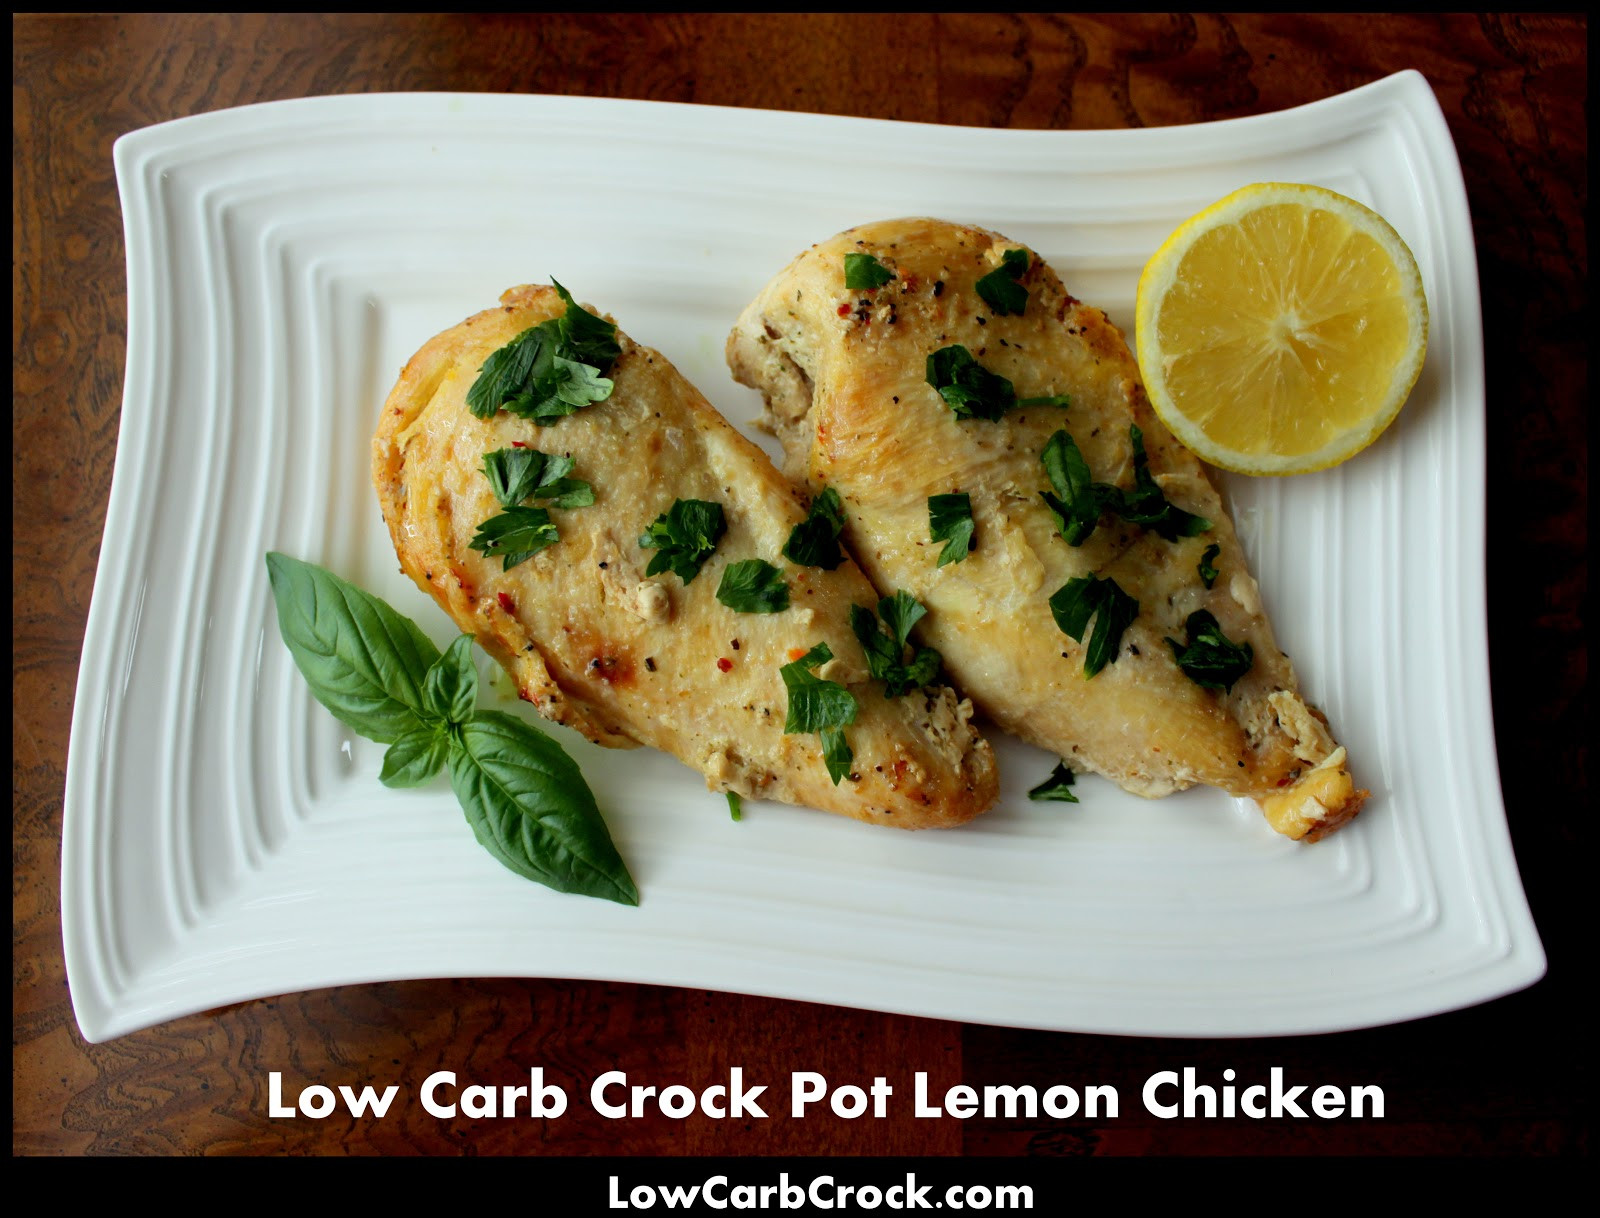 Low Carb Crockpot Chicken Recipes
 Low Carb Crock Pot Lemon Chicken from frozen chicken breasts